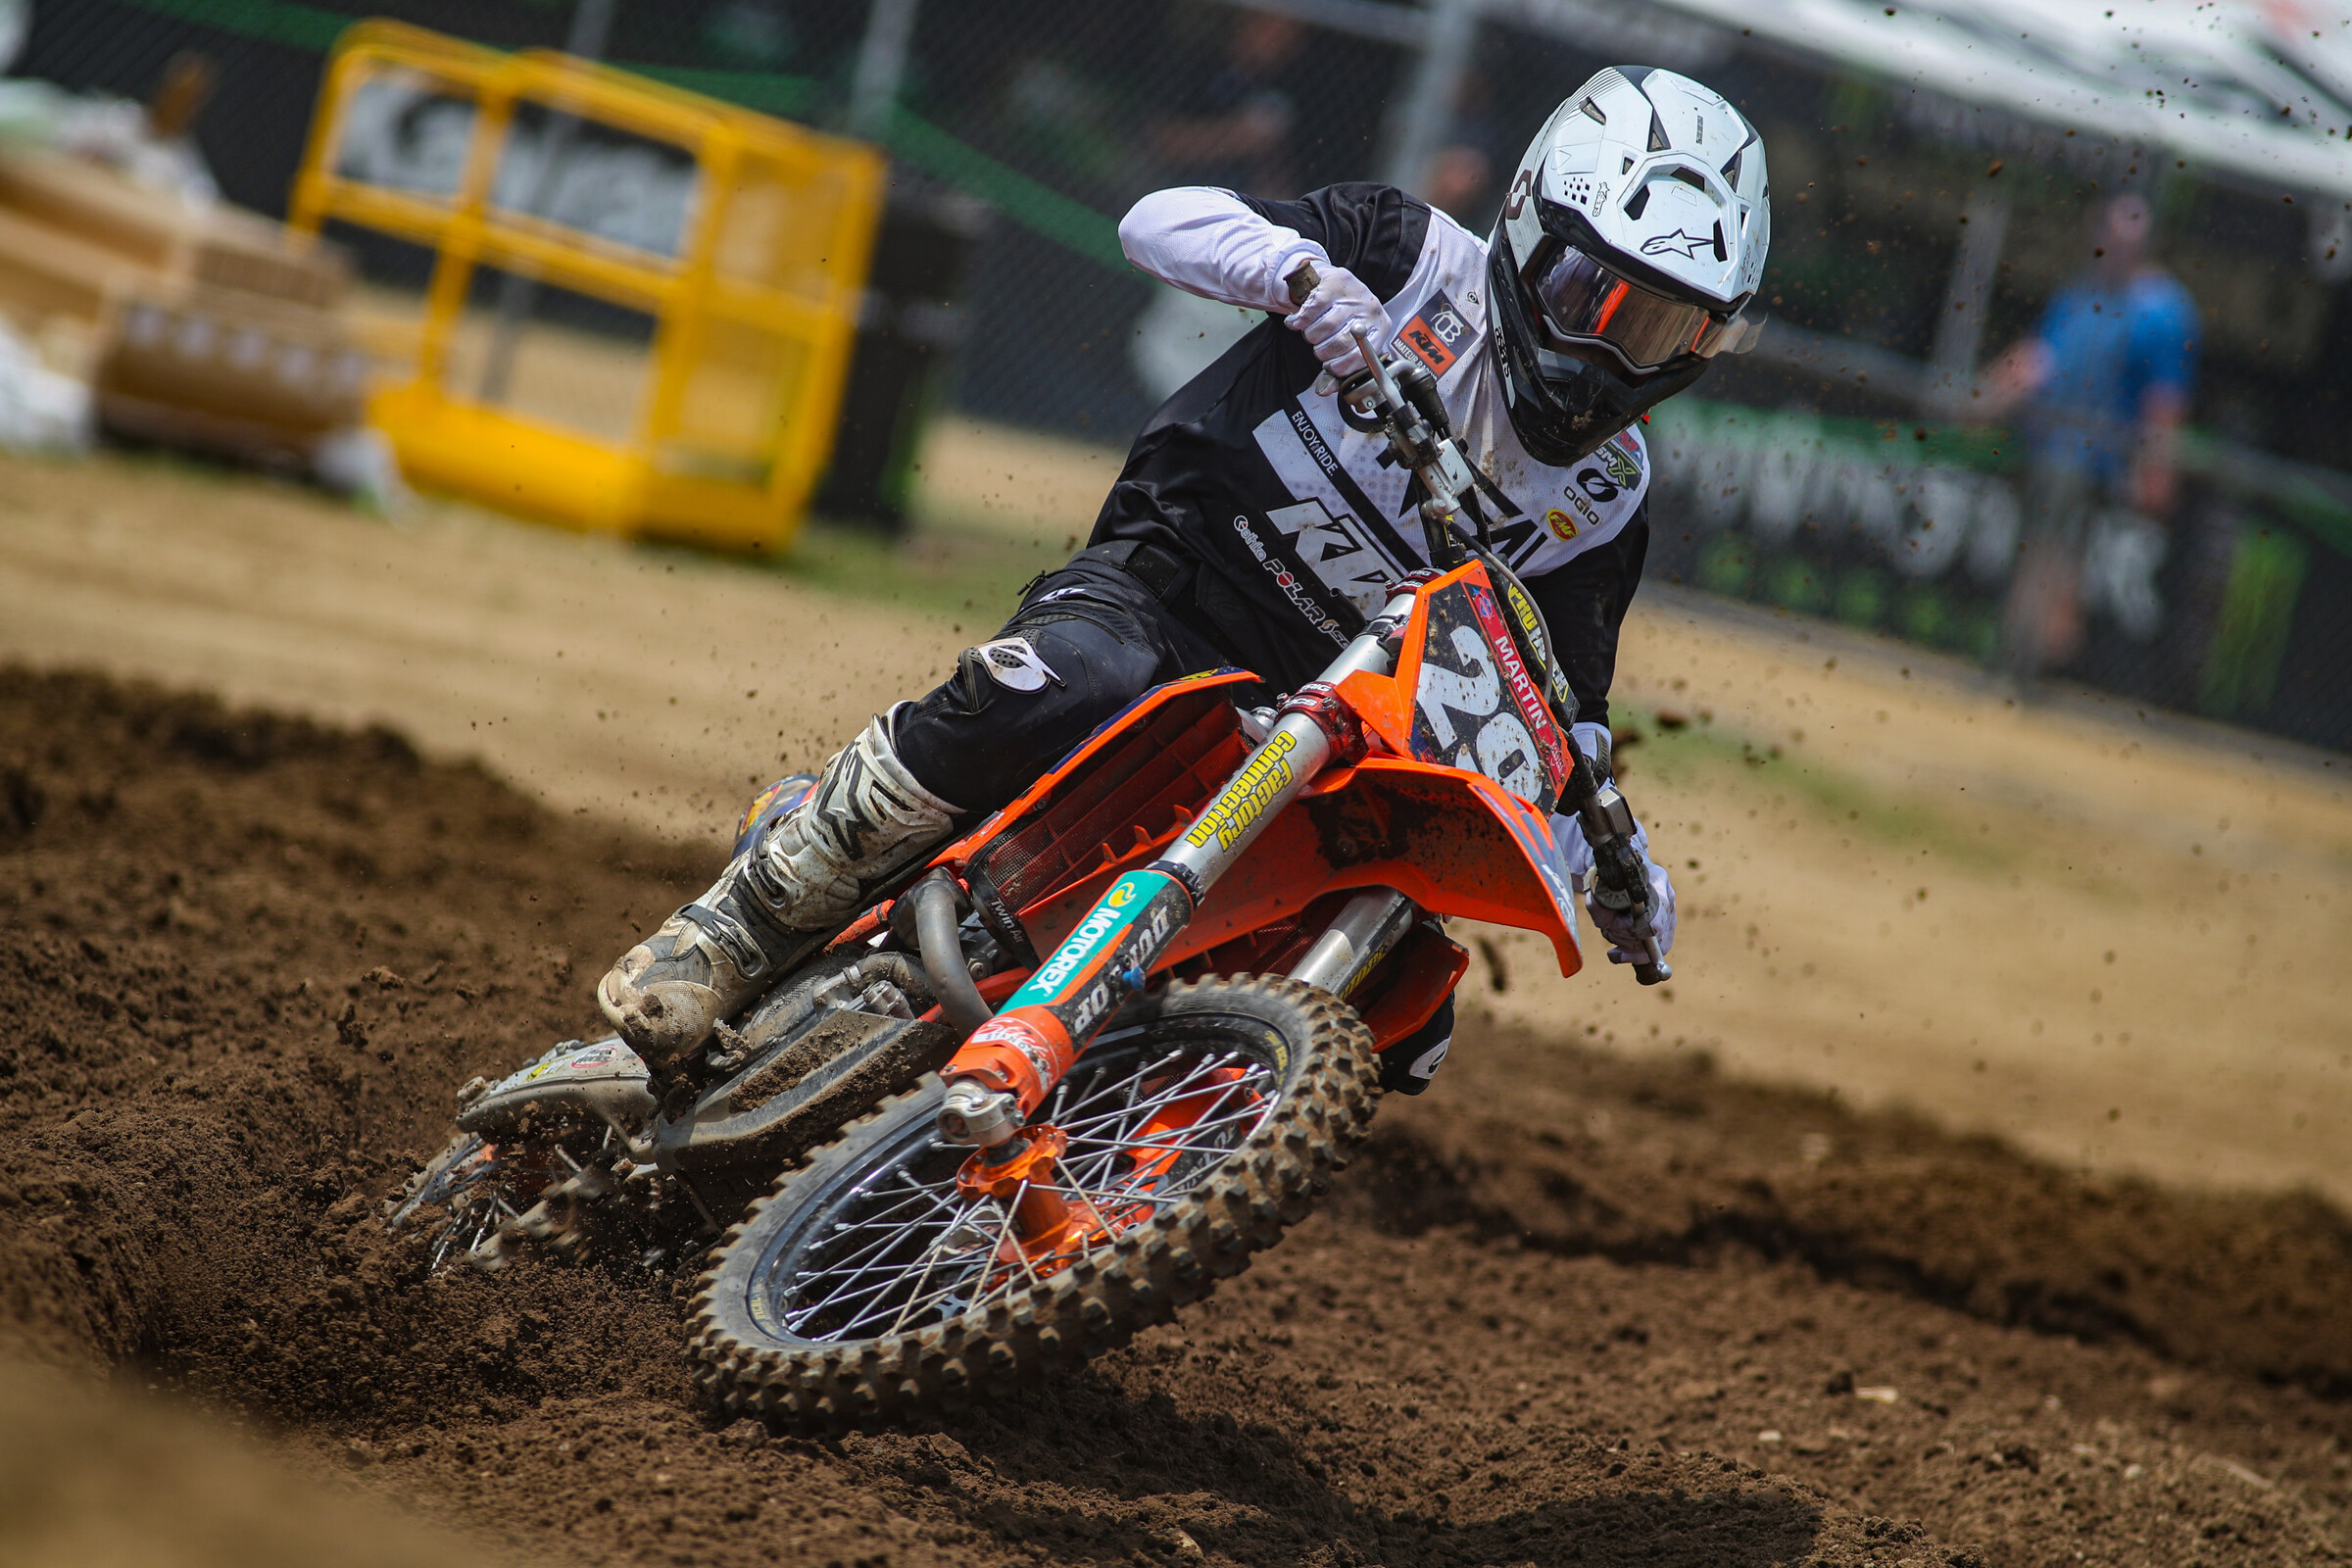 2023 Mammoth Motocross Results (Updated) - Cycle News